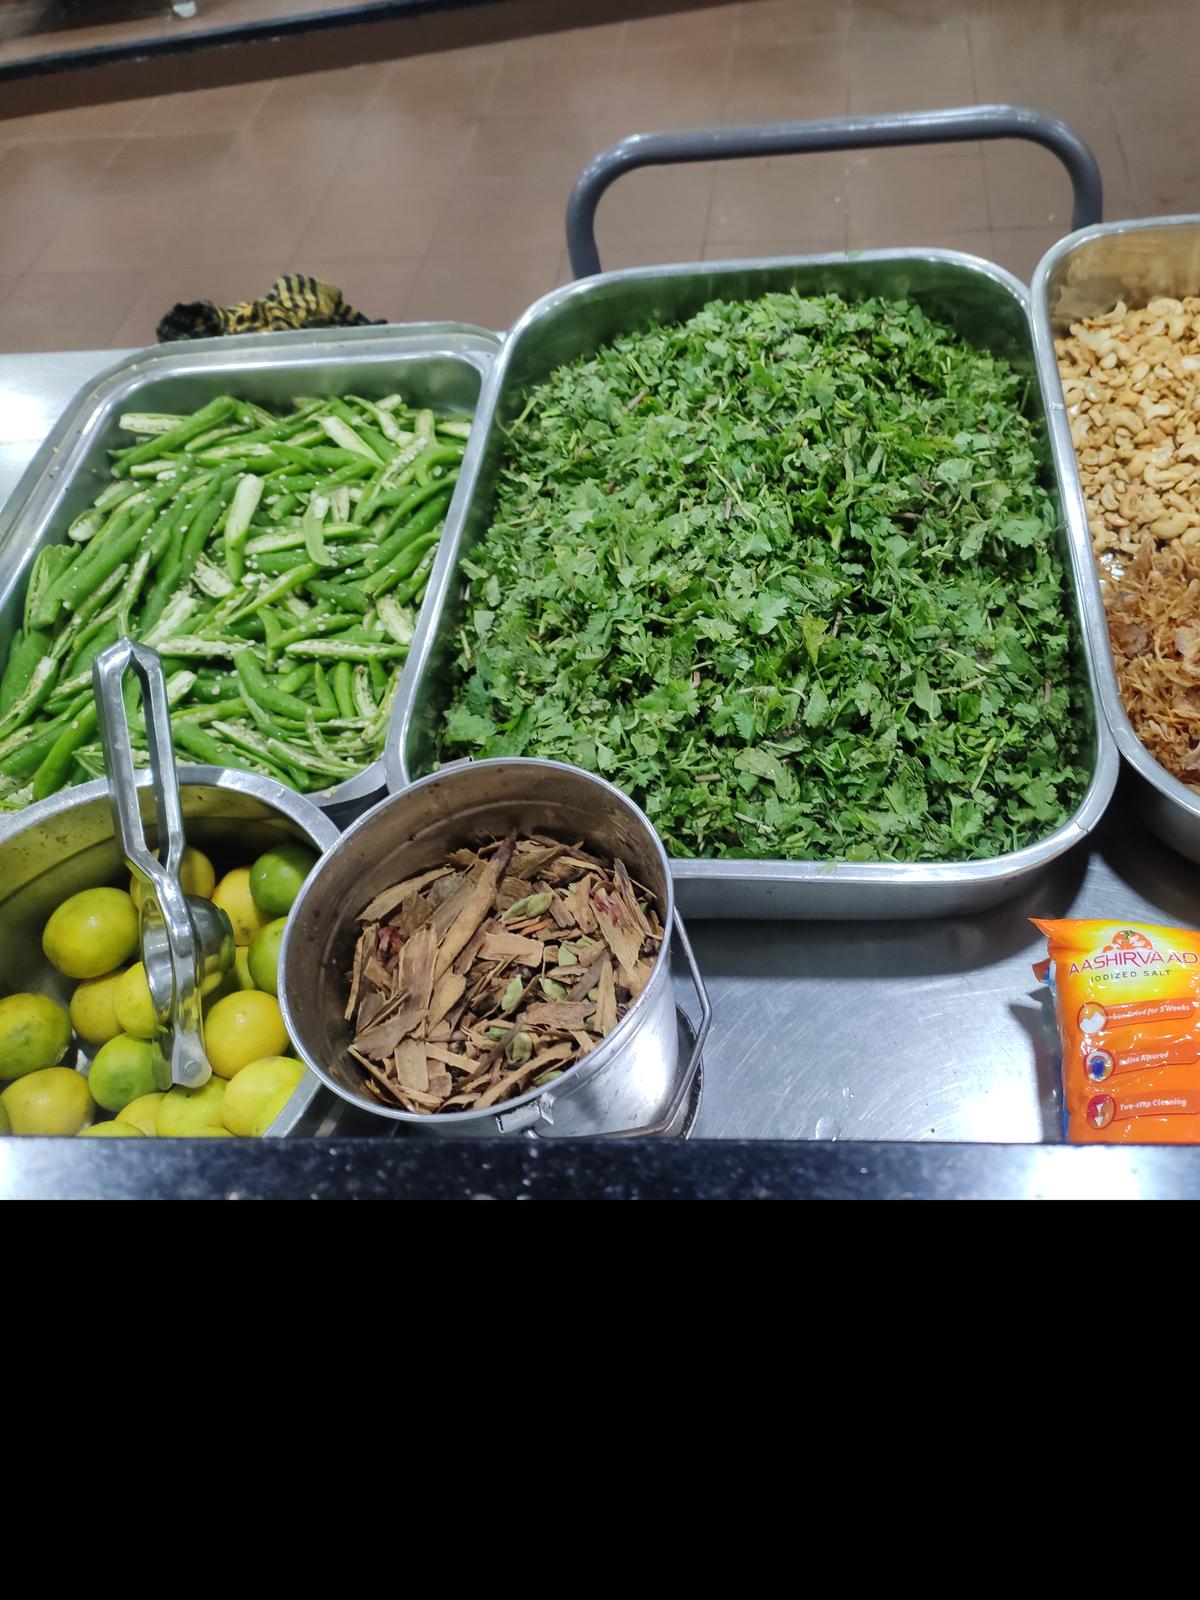 Some of the ingredients used in Travancore Biryani made independently.